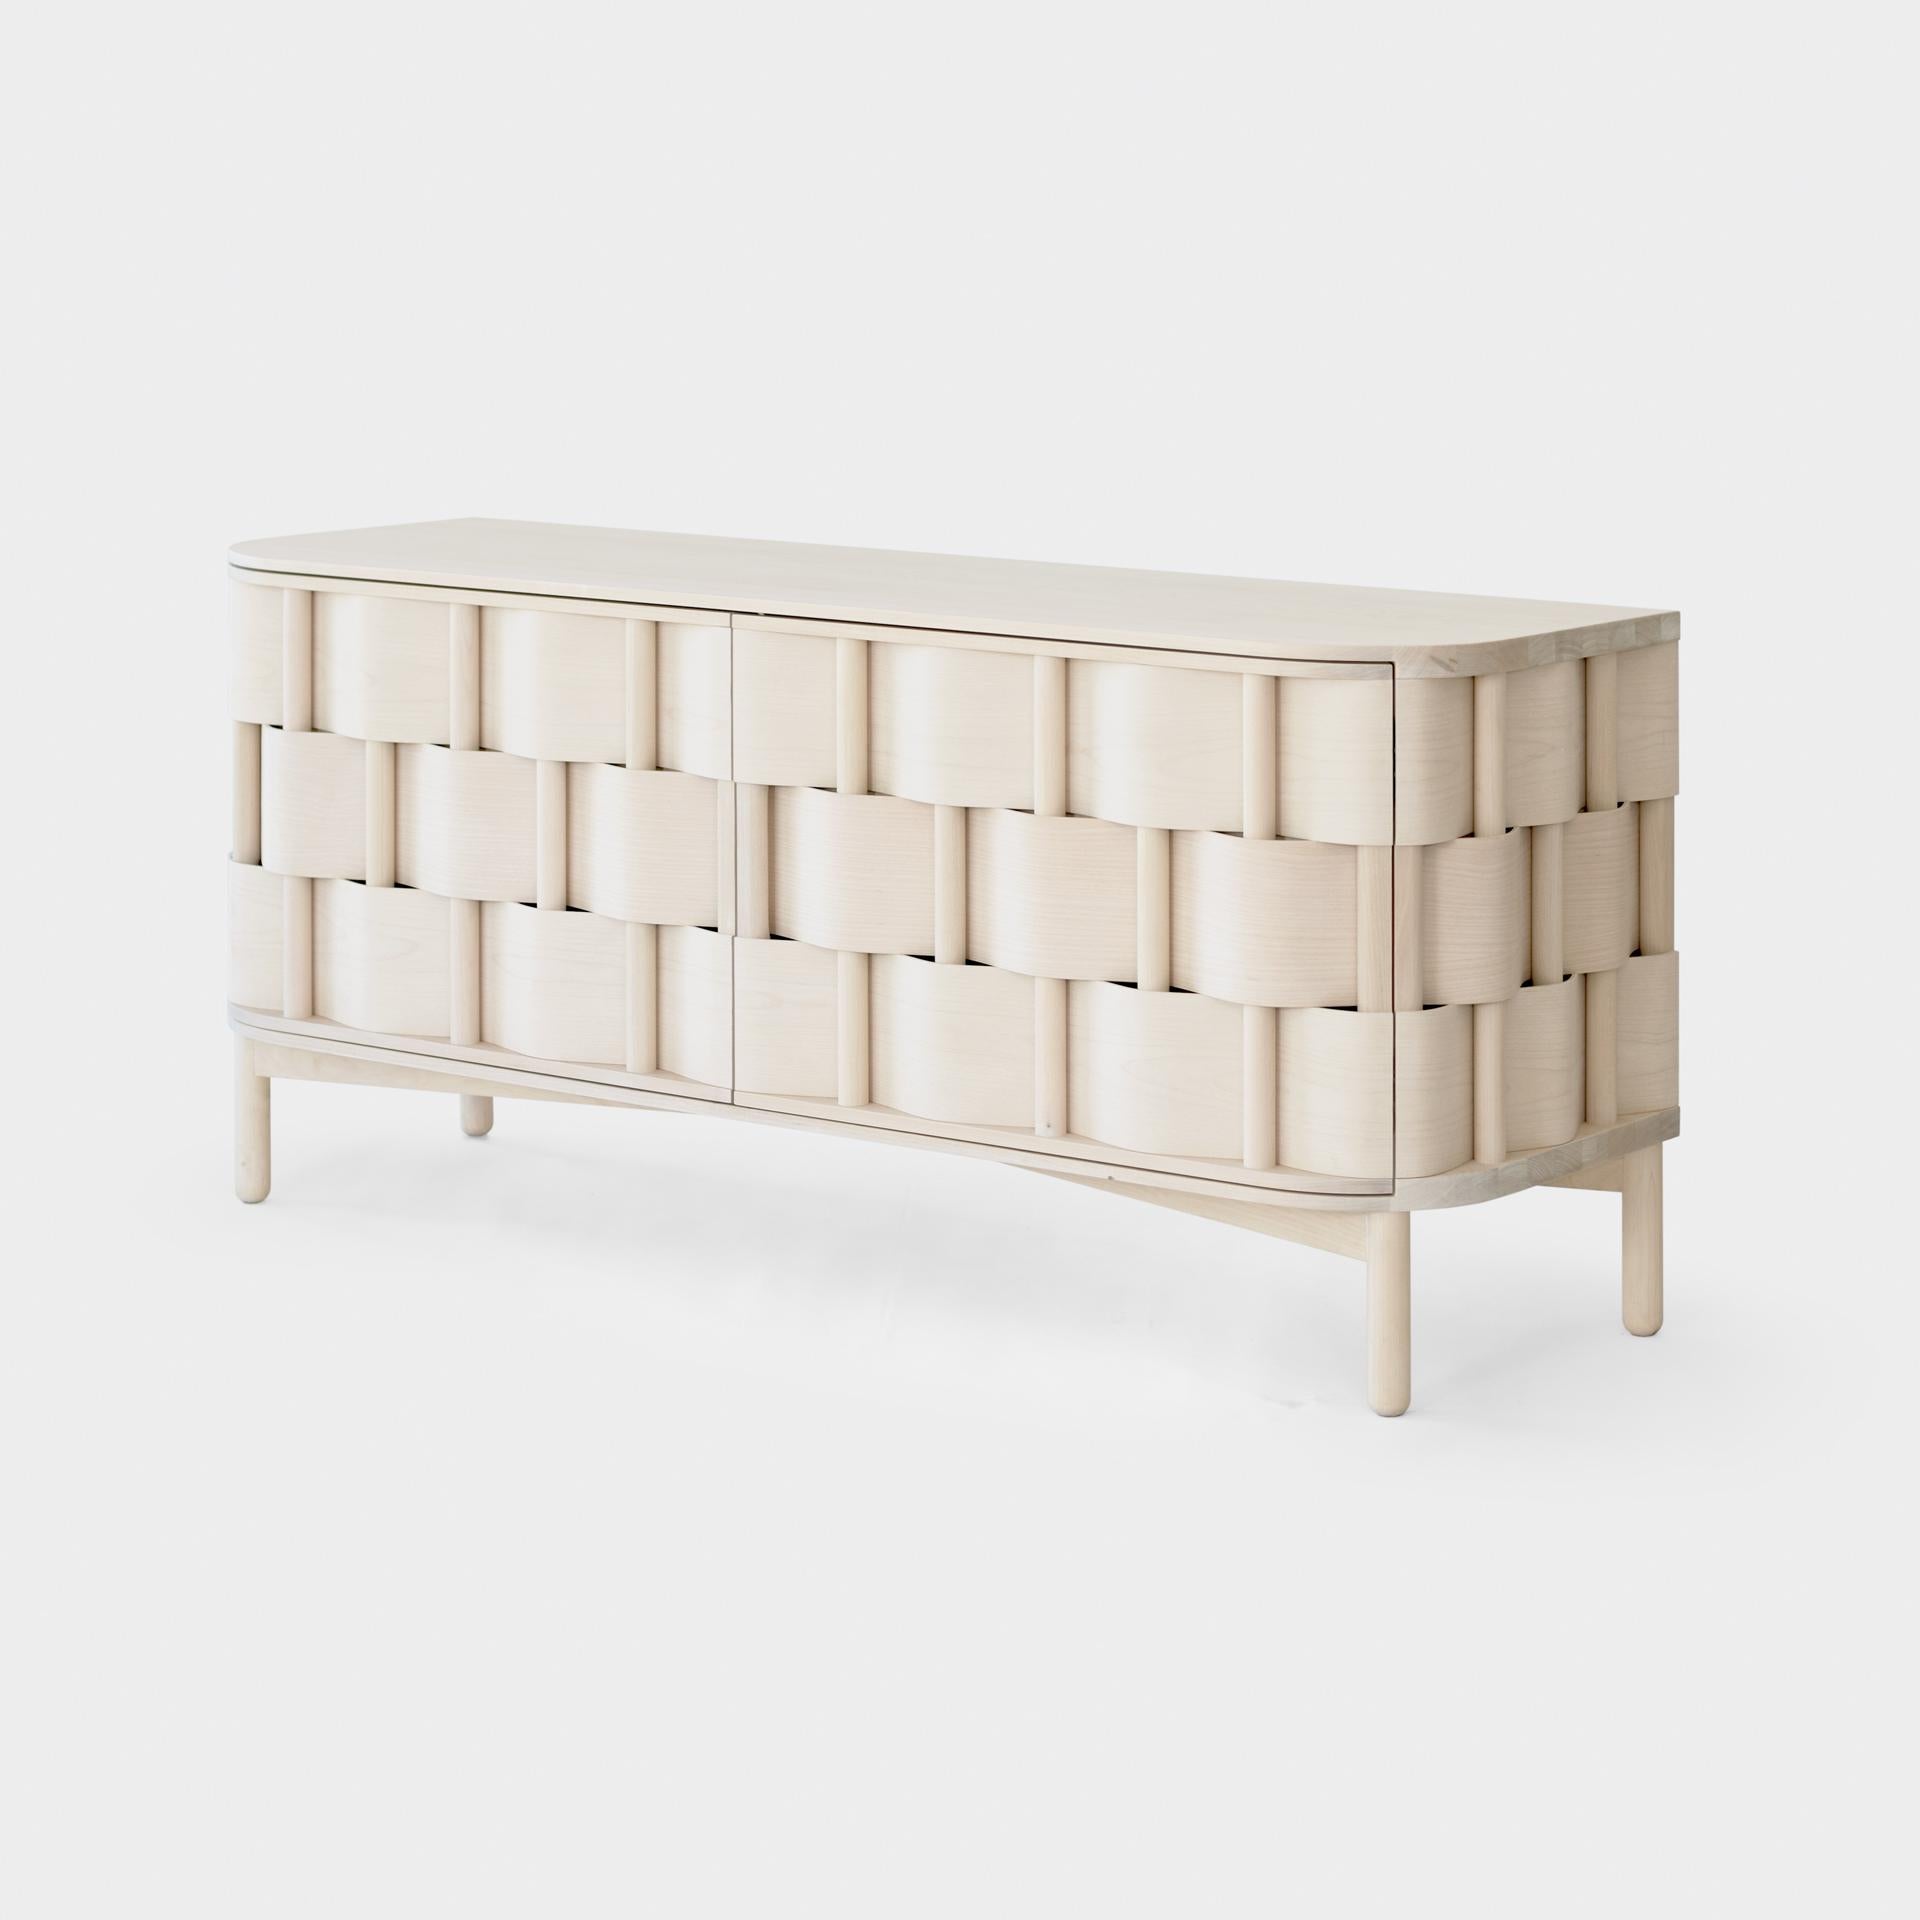 Weave 133 Birch wood, natural oil 
Credenza made of solid birch wood and birch veneér. Modern yet Classic, bold yet modest the cabinet serves as a great example of Scandinavian contemporary design. Designed by Lukas Dahlén.

The minimal yet